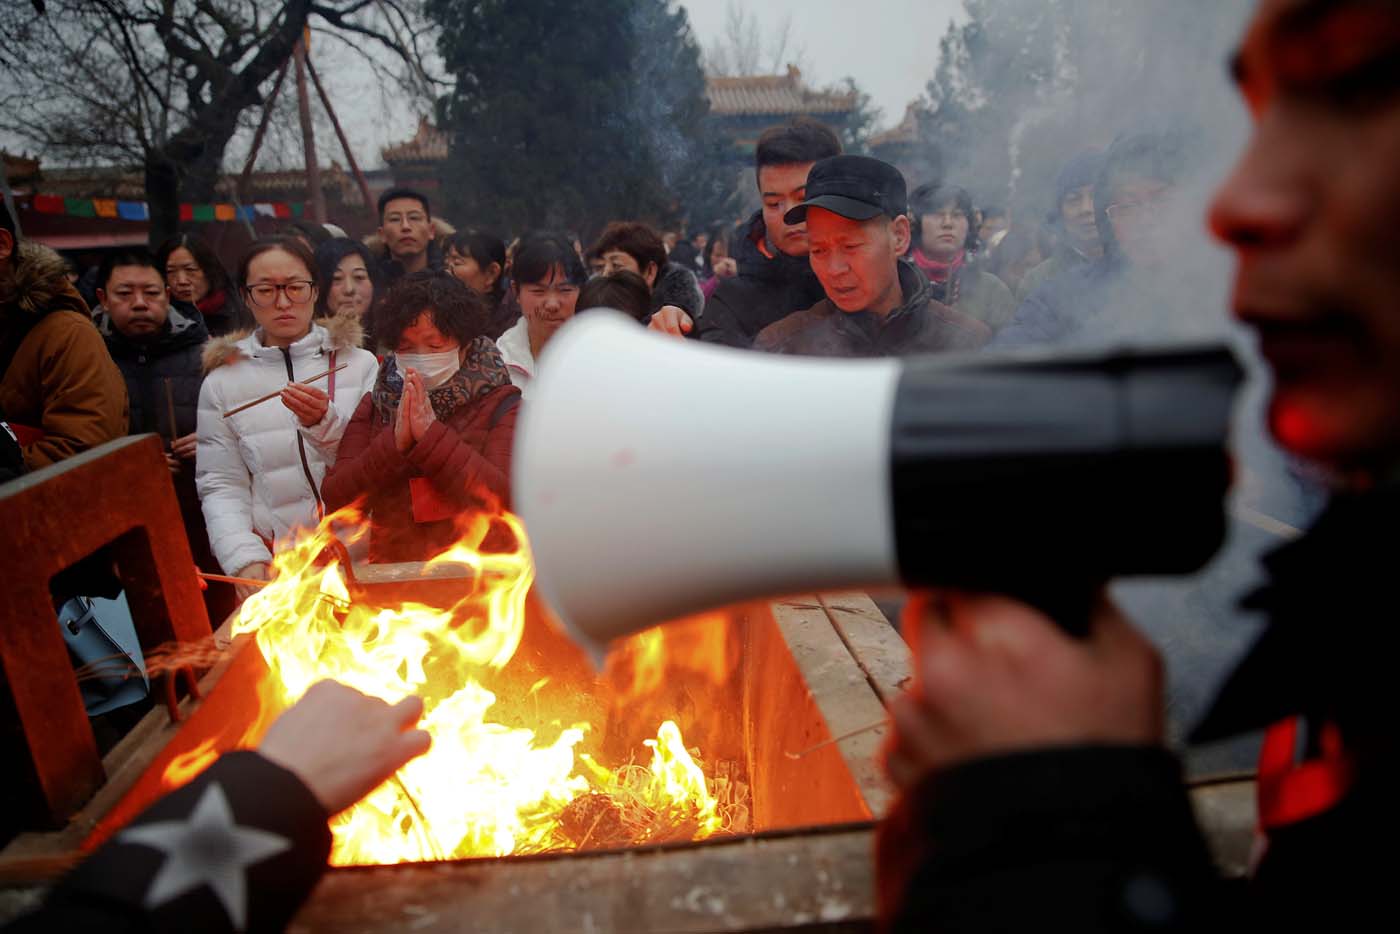 A man uses a megaphone to give instructions as people burn incense sticks and pray for good fortune at Yonghegong Lama Temple on the first day of the Lunar New Year of the Rooster in Beijing, China January 28, 2017. REUTERS/Damir Sagolj